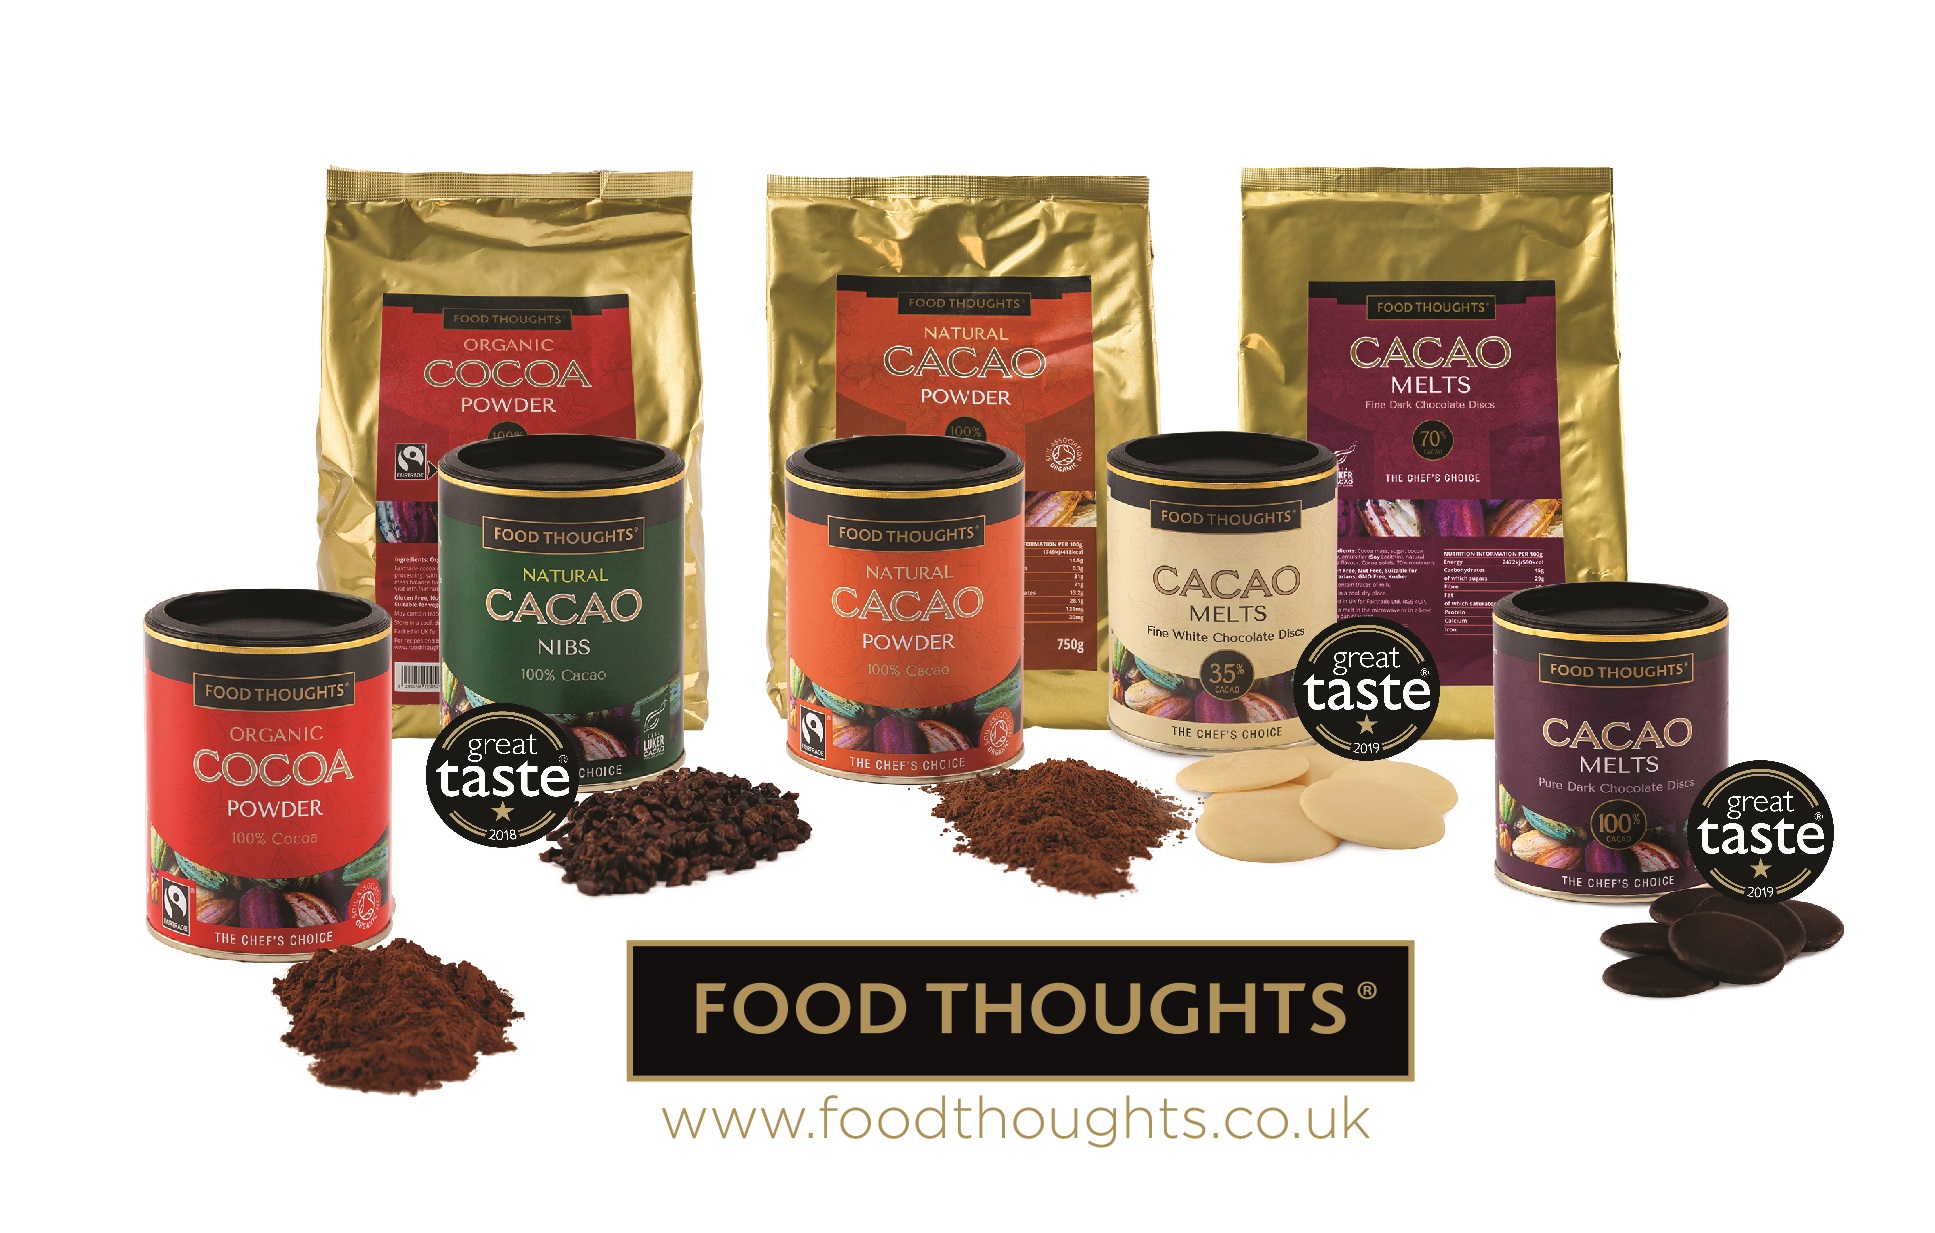 Food Thoughts Cacao helps make your Great British bakes healthier and tastier